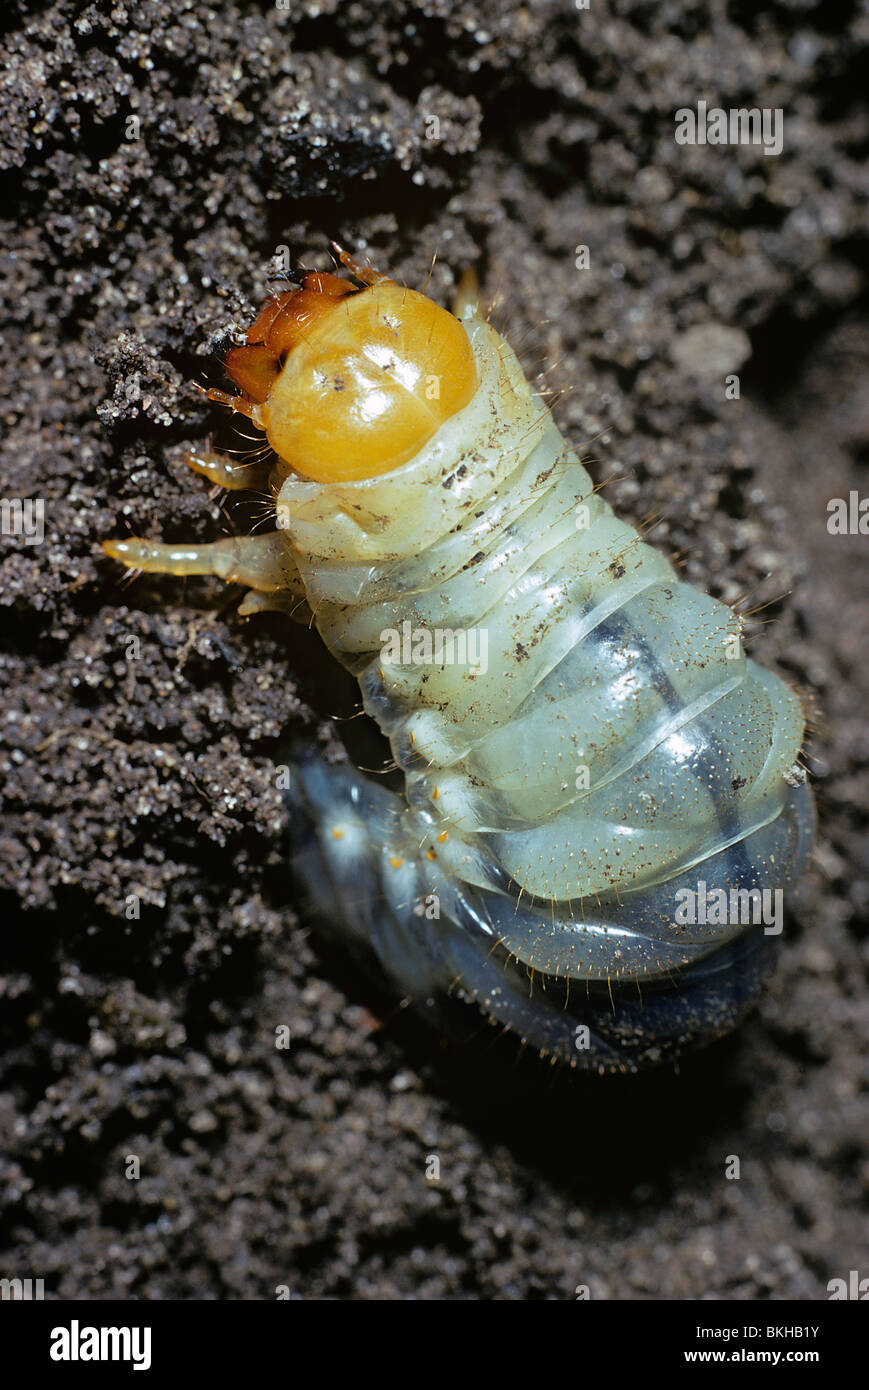 Cockchafer or may bug, Melolontha melolontha, larva which lives in the soil eating roots Stock Photo